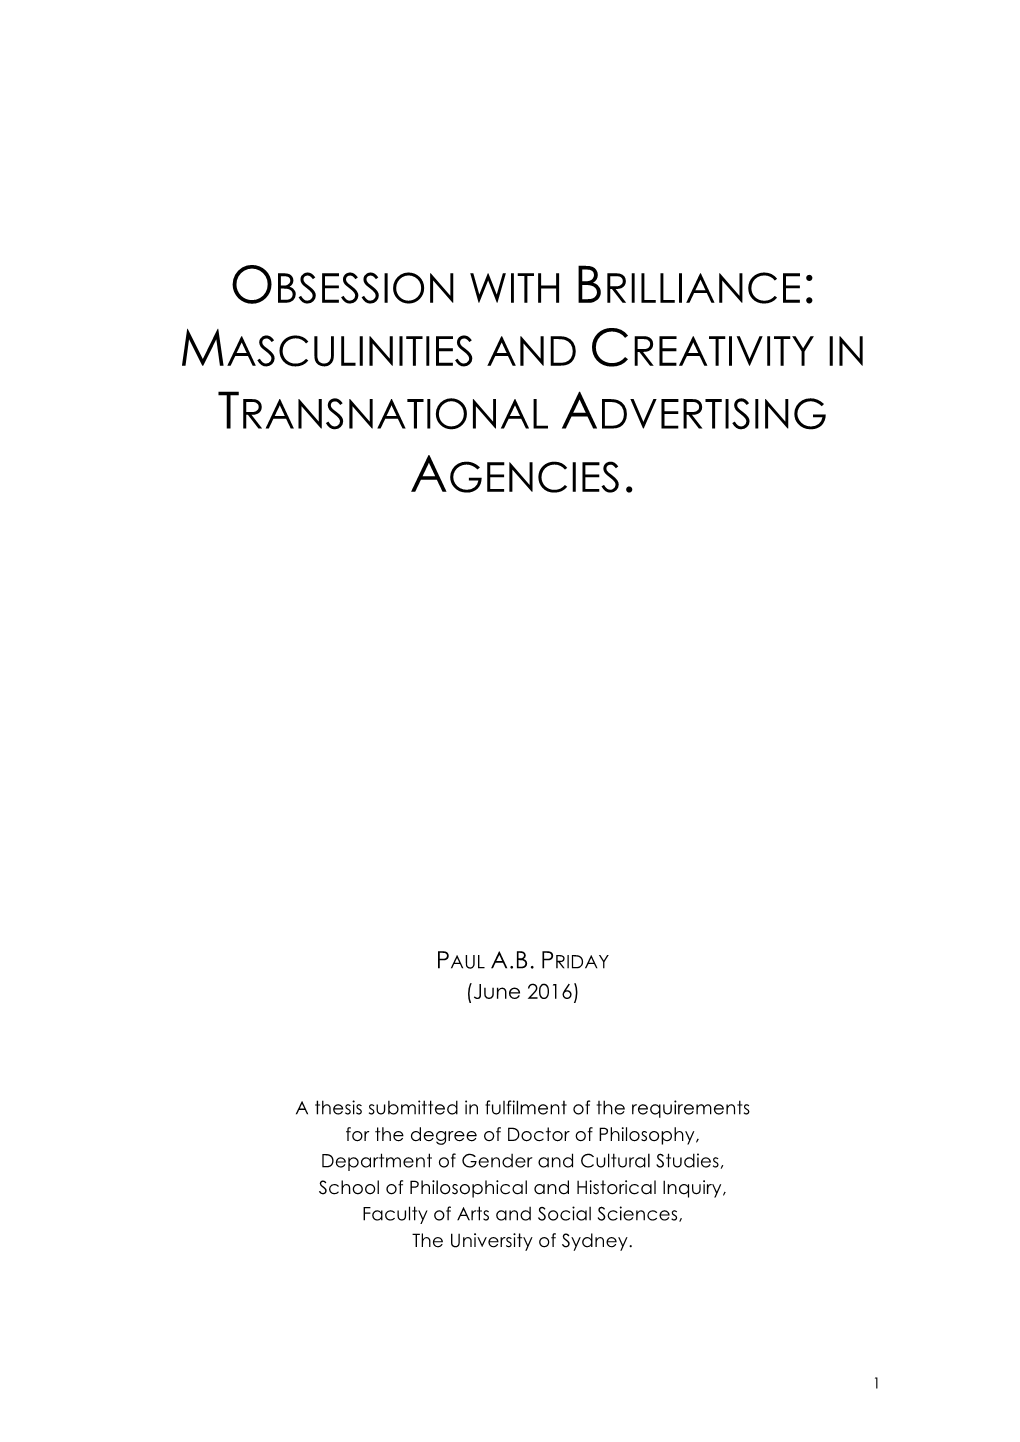 Masculinities and Creativity in Transnational Advertising Agencies